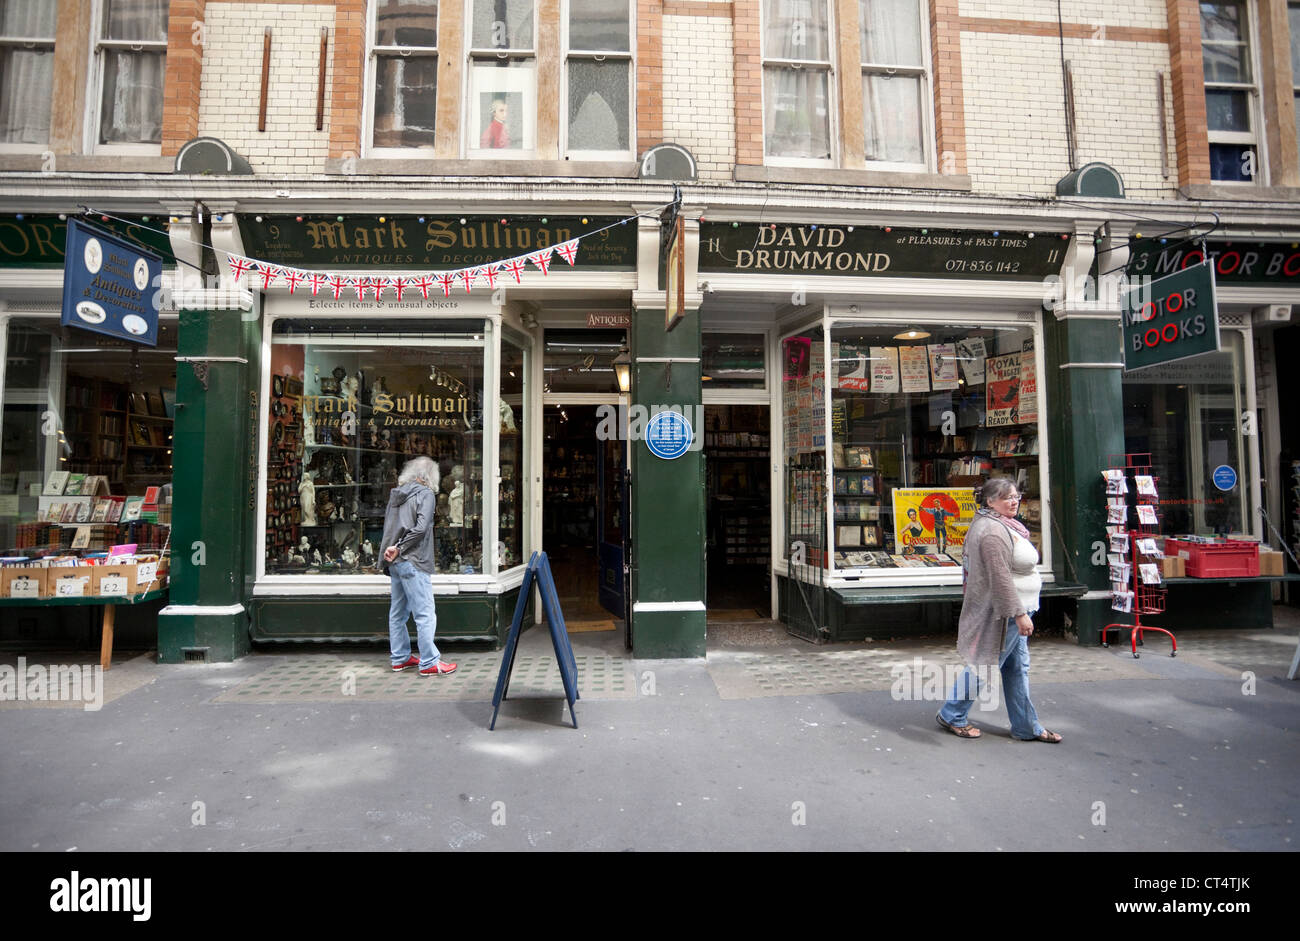 Cecil Court Trader's Association row of book shops, London, England, UK Stock Photo